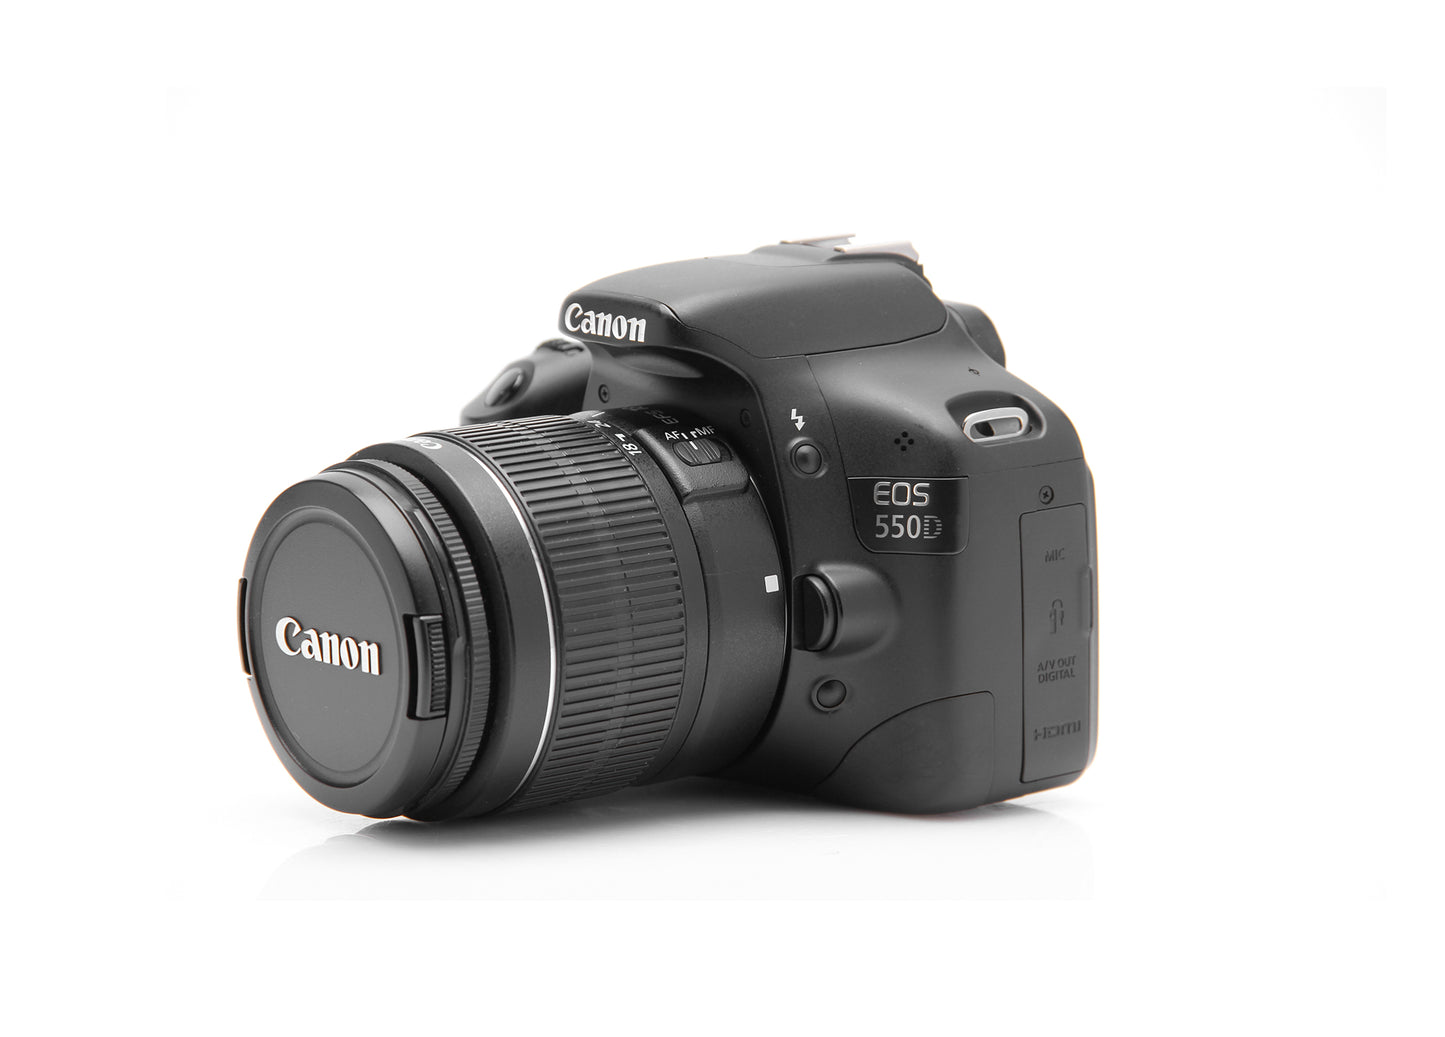 Used Canon 550D Camera with 18-55mm Lens